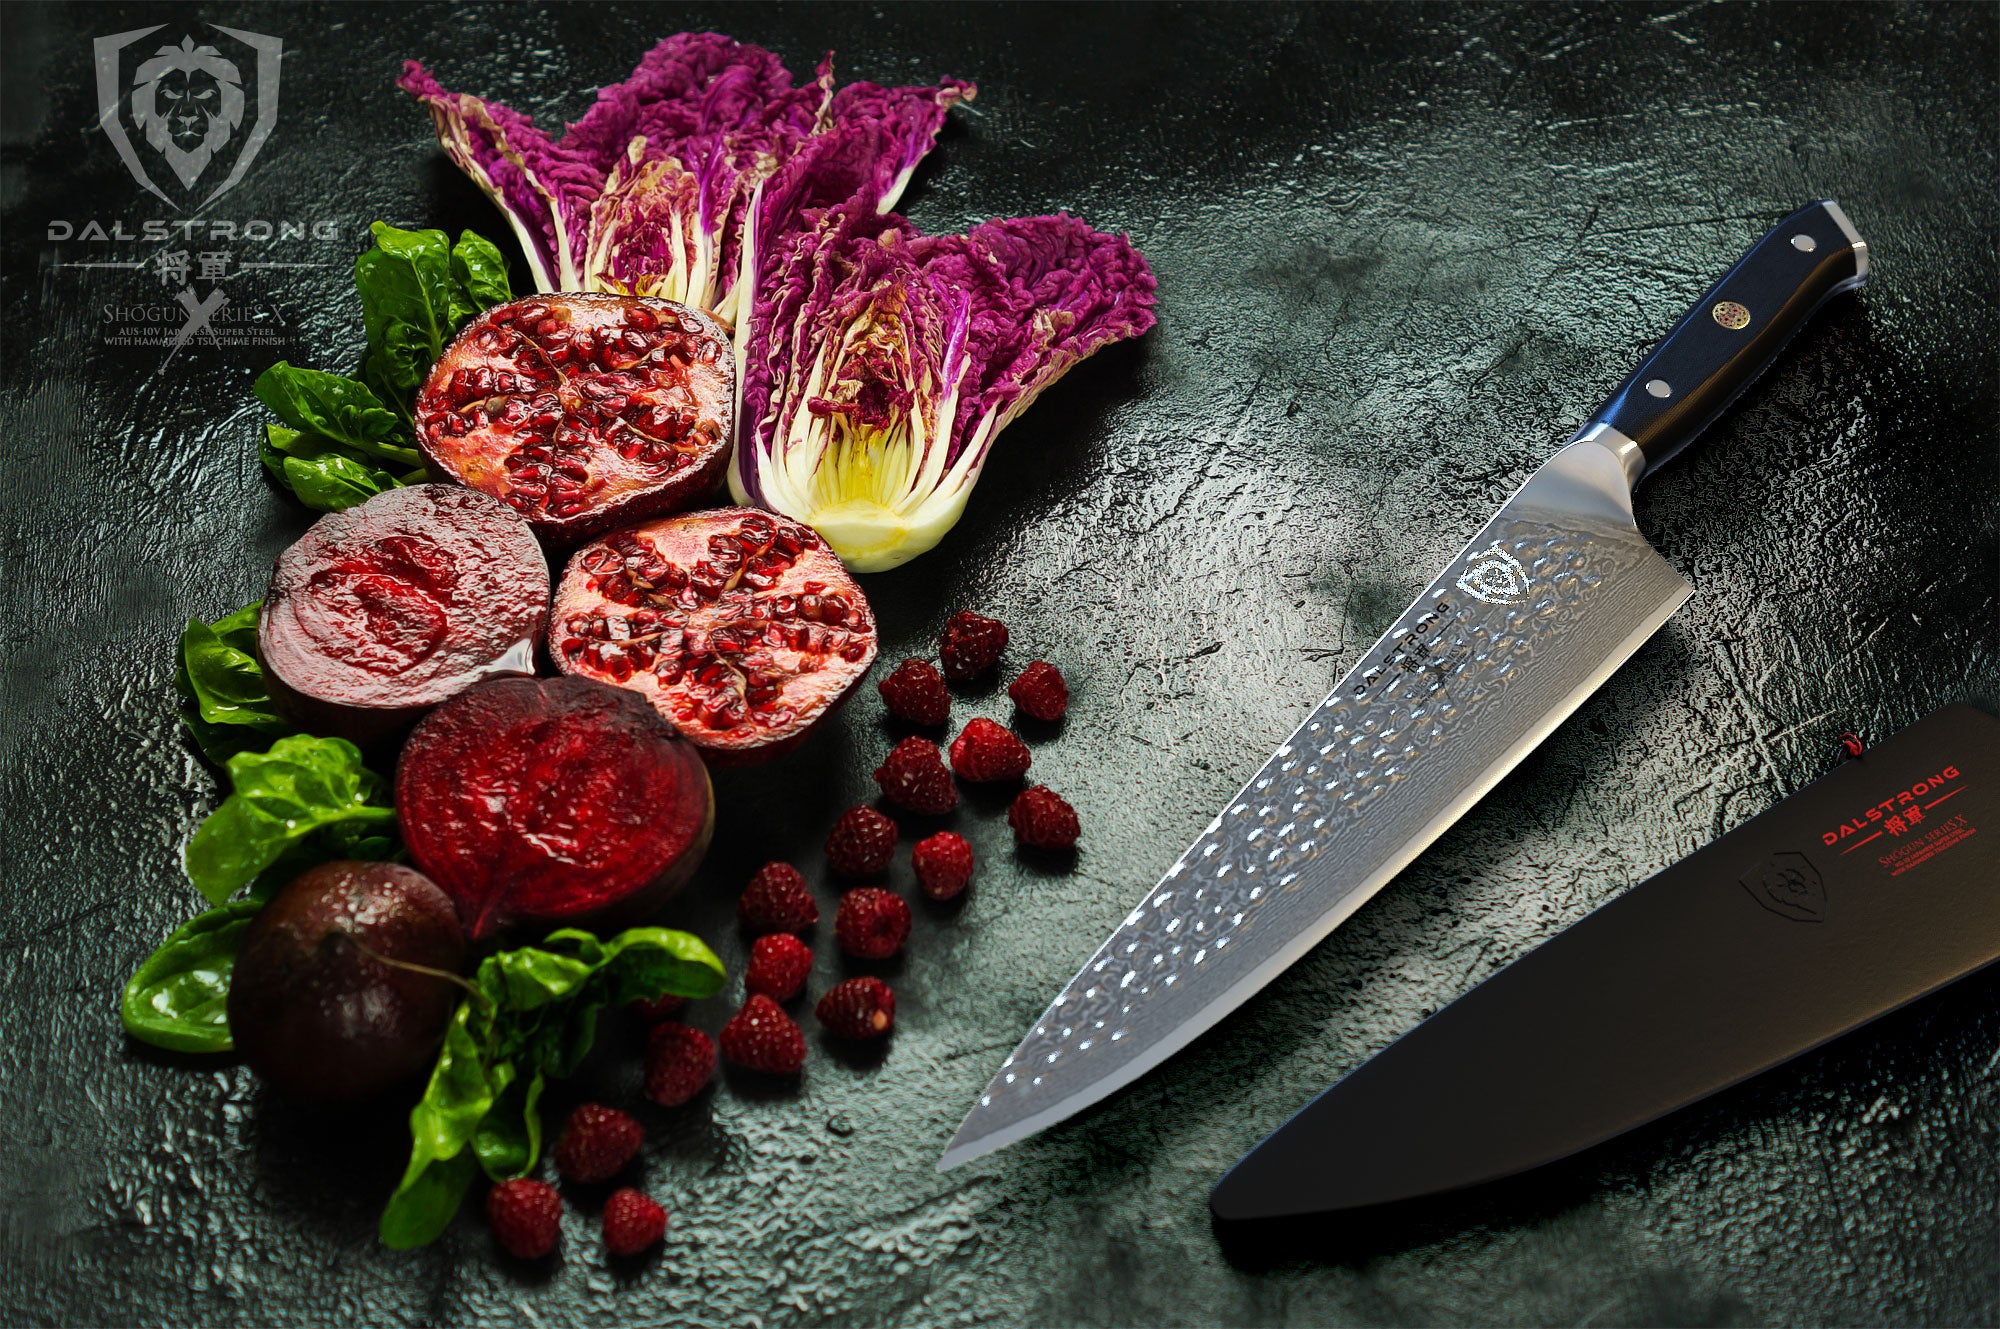 Soufull Chef Knife 8 inches Japanese Stainless Steel Gyutou Knife  Professional Kitchen Knife with Ergonomic Handle (chef knife) 